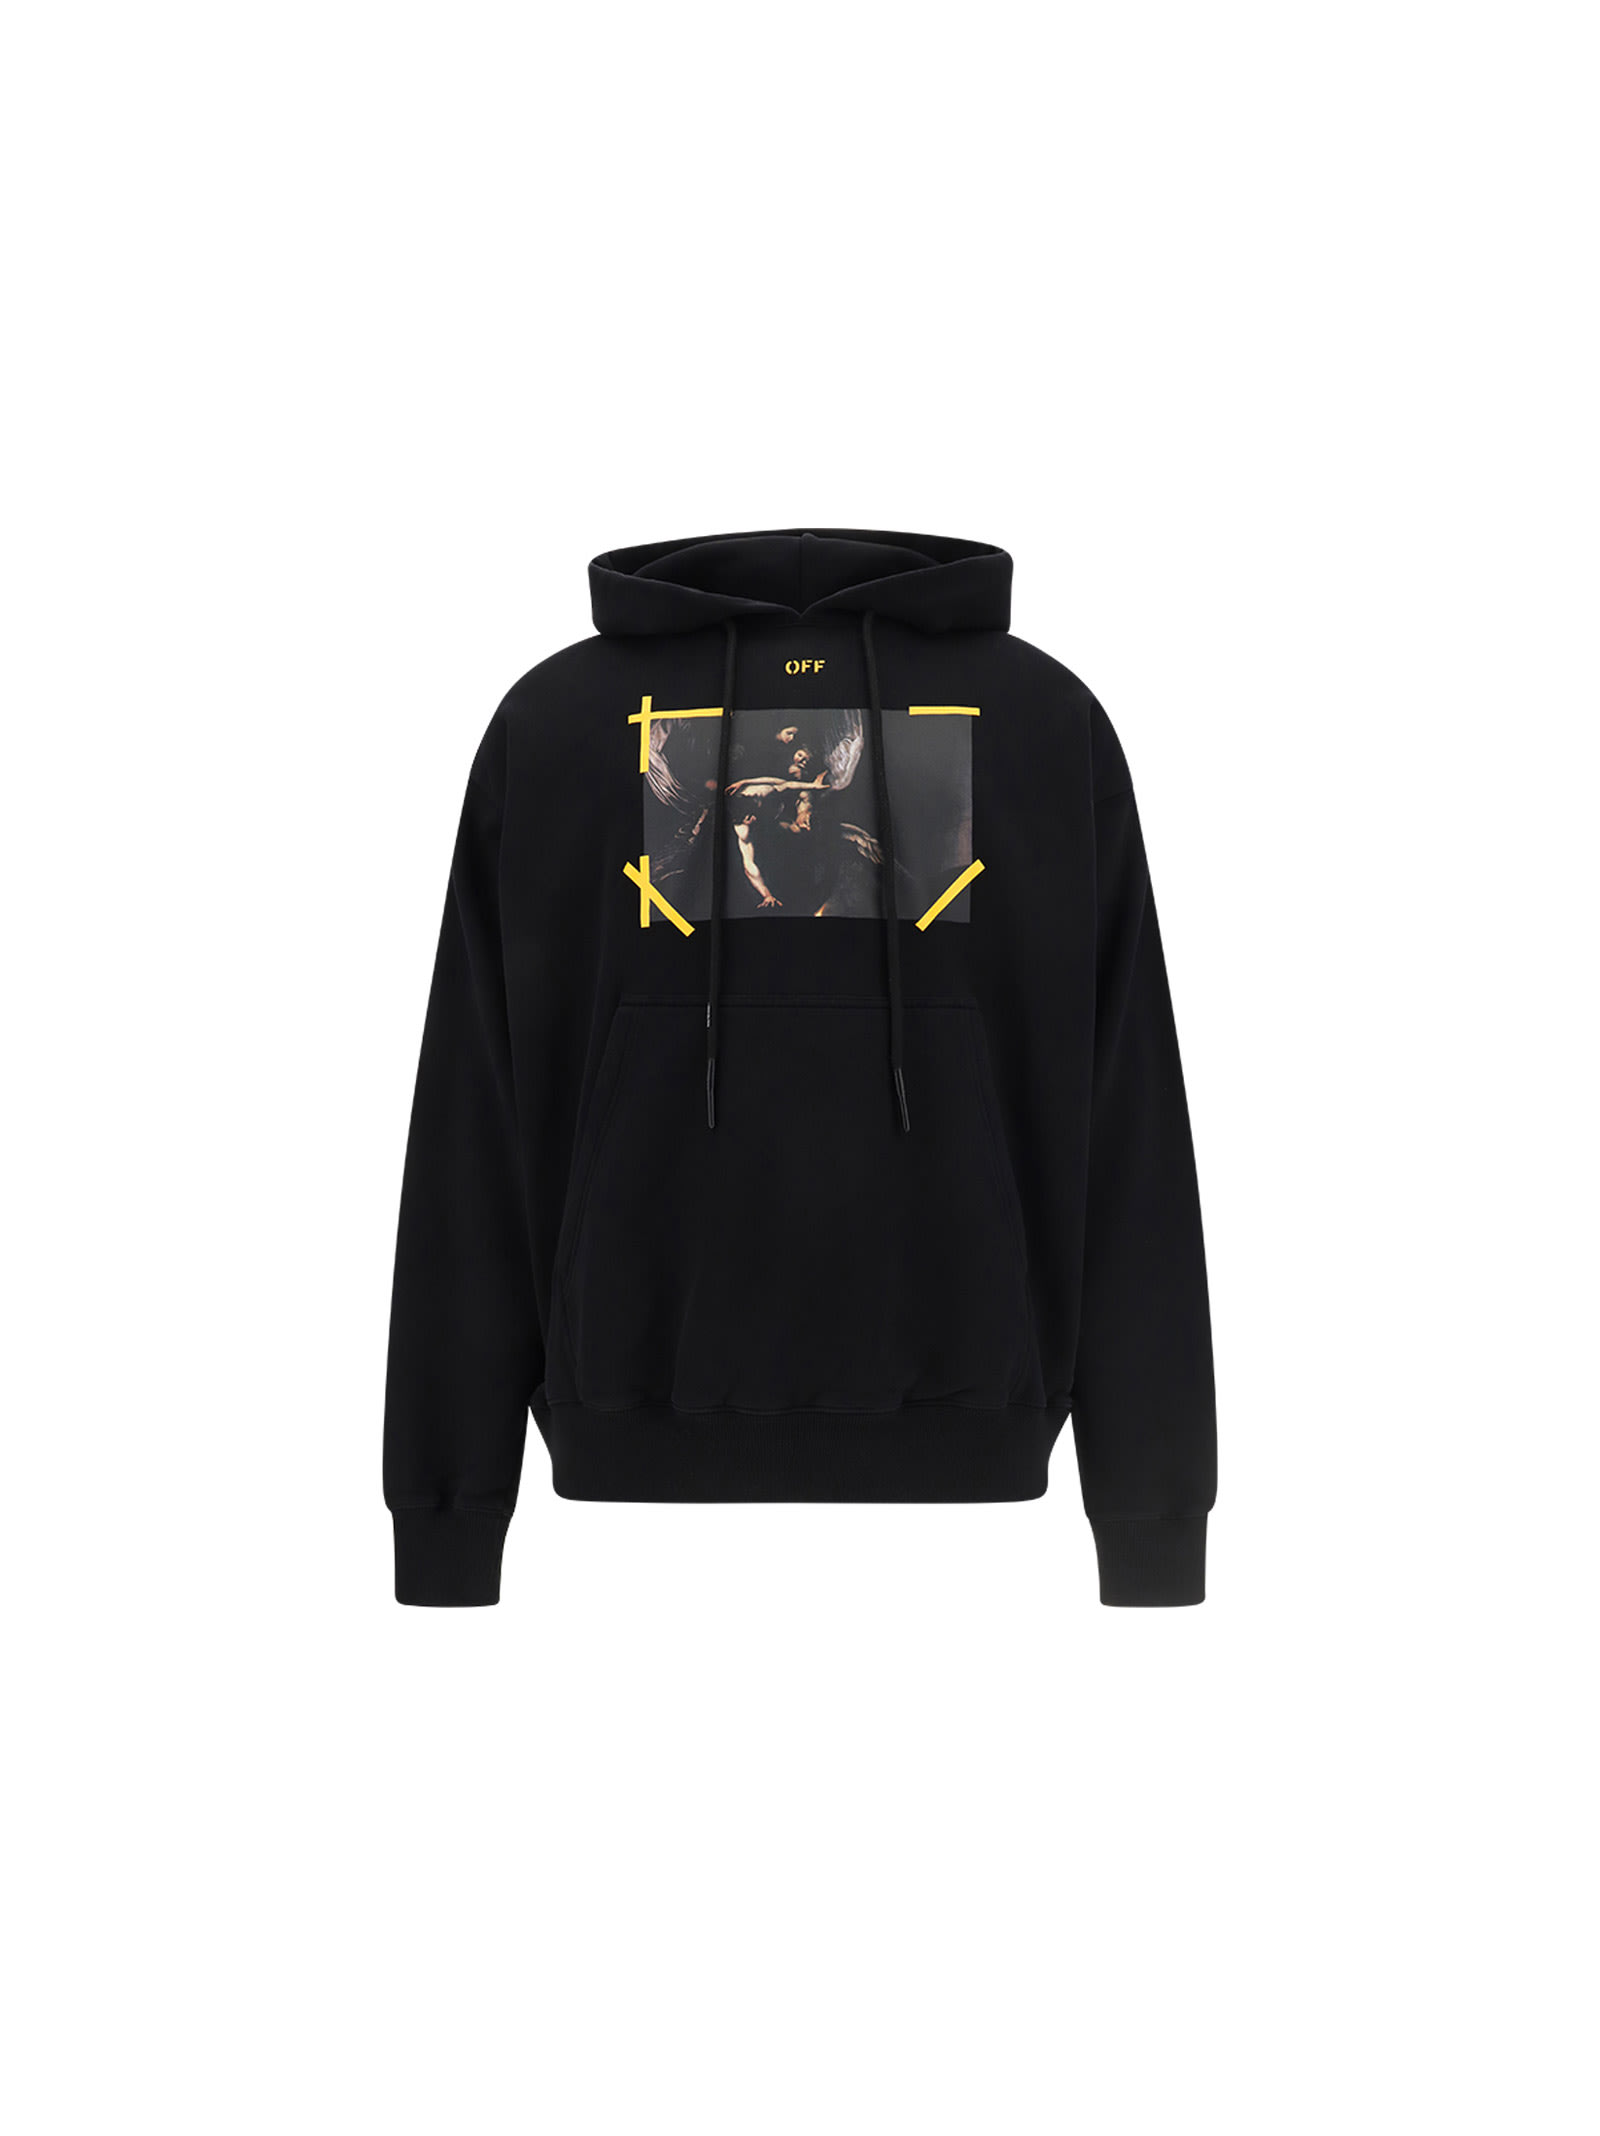 Off-White Mercy Stake Hoodie